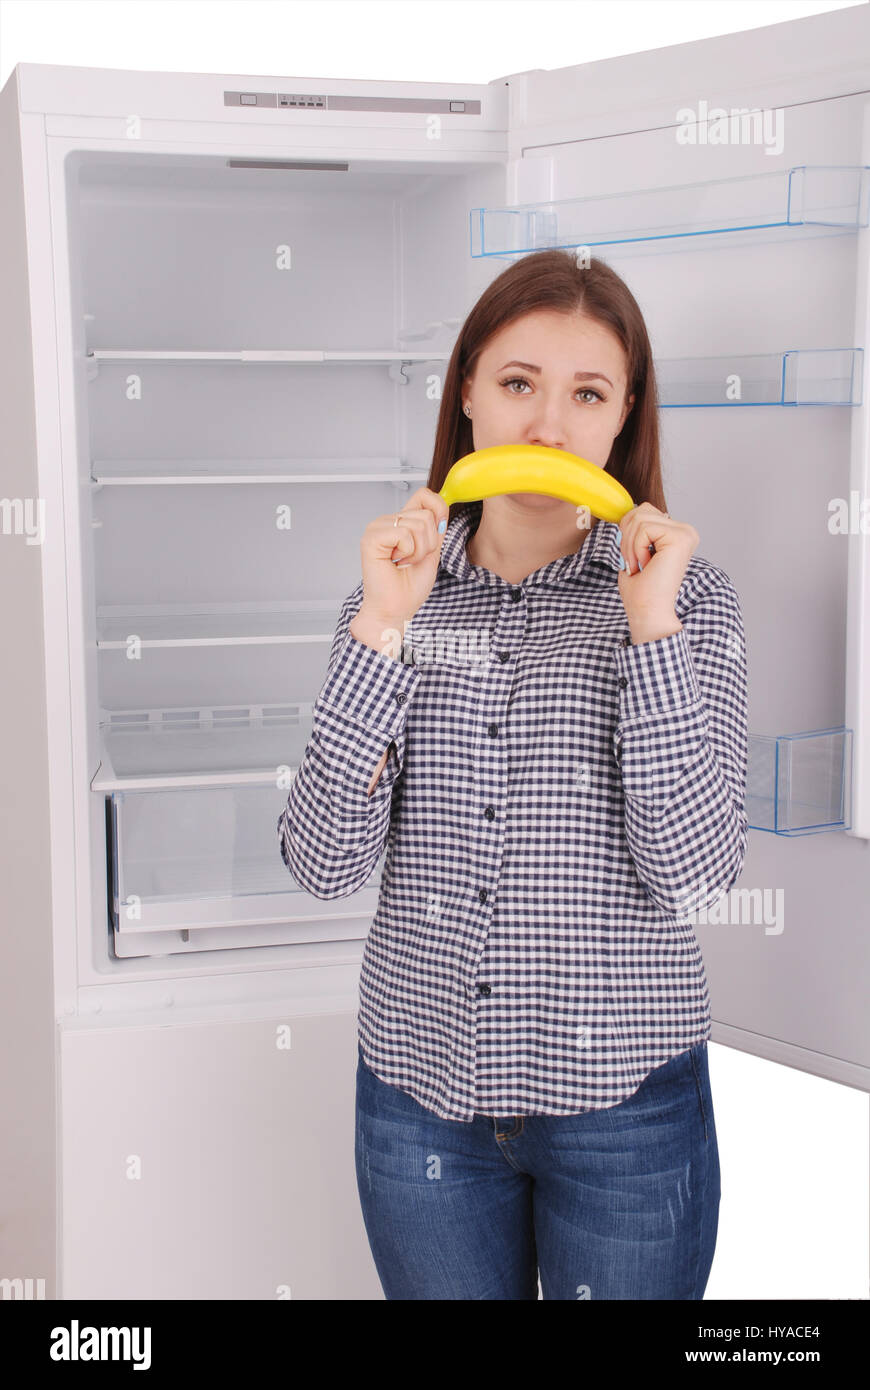 A young girl holds up a banana to her mouth, imitating a smile. Beautiful young girl near the fridge. Stock Photo